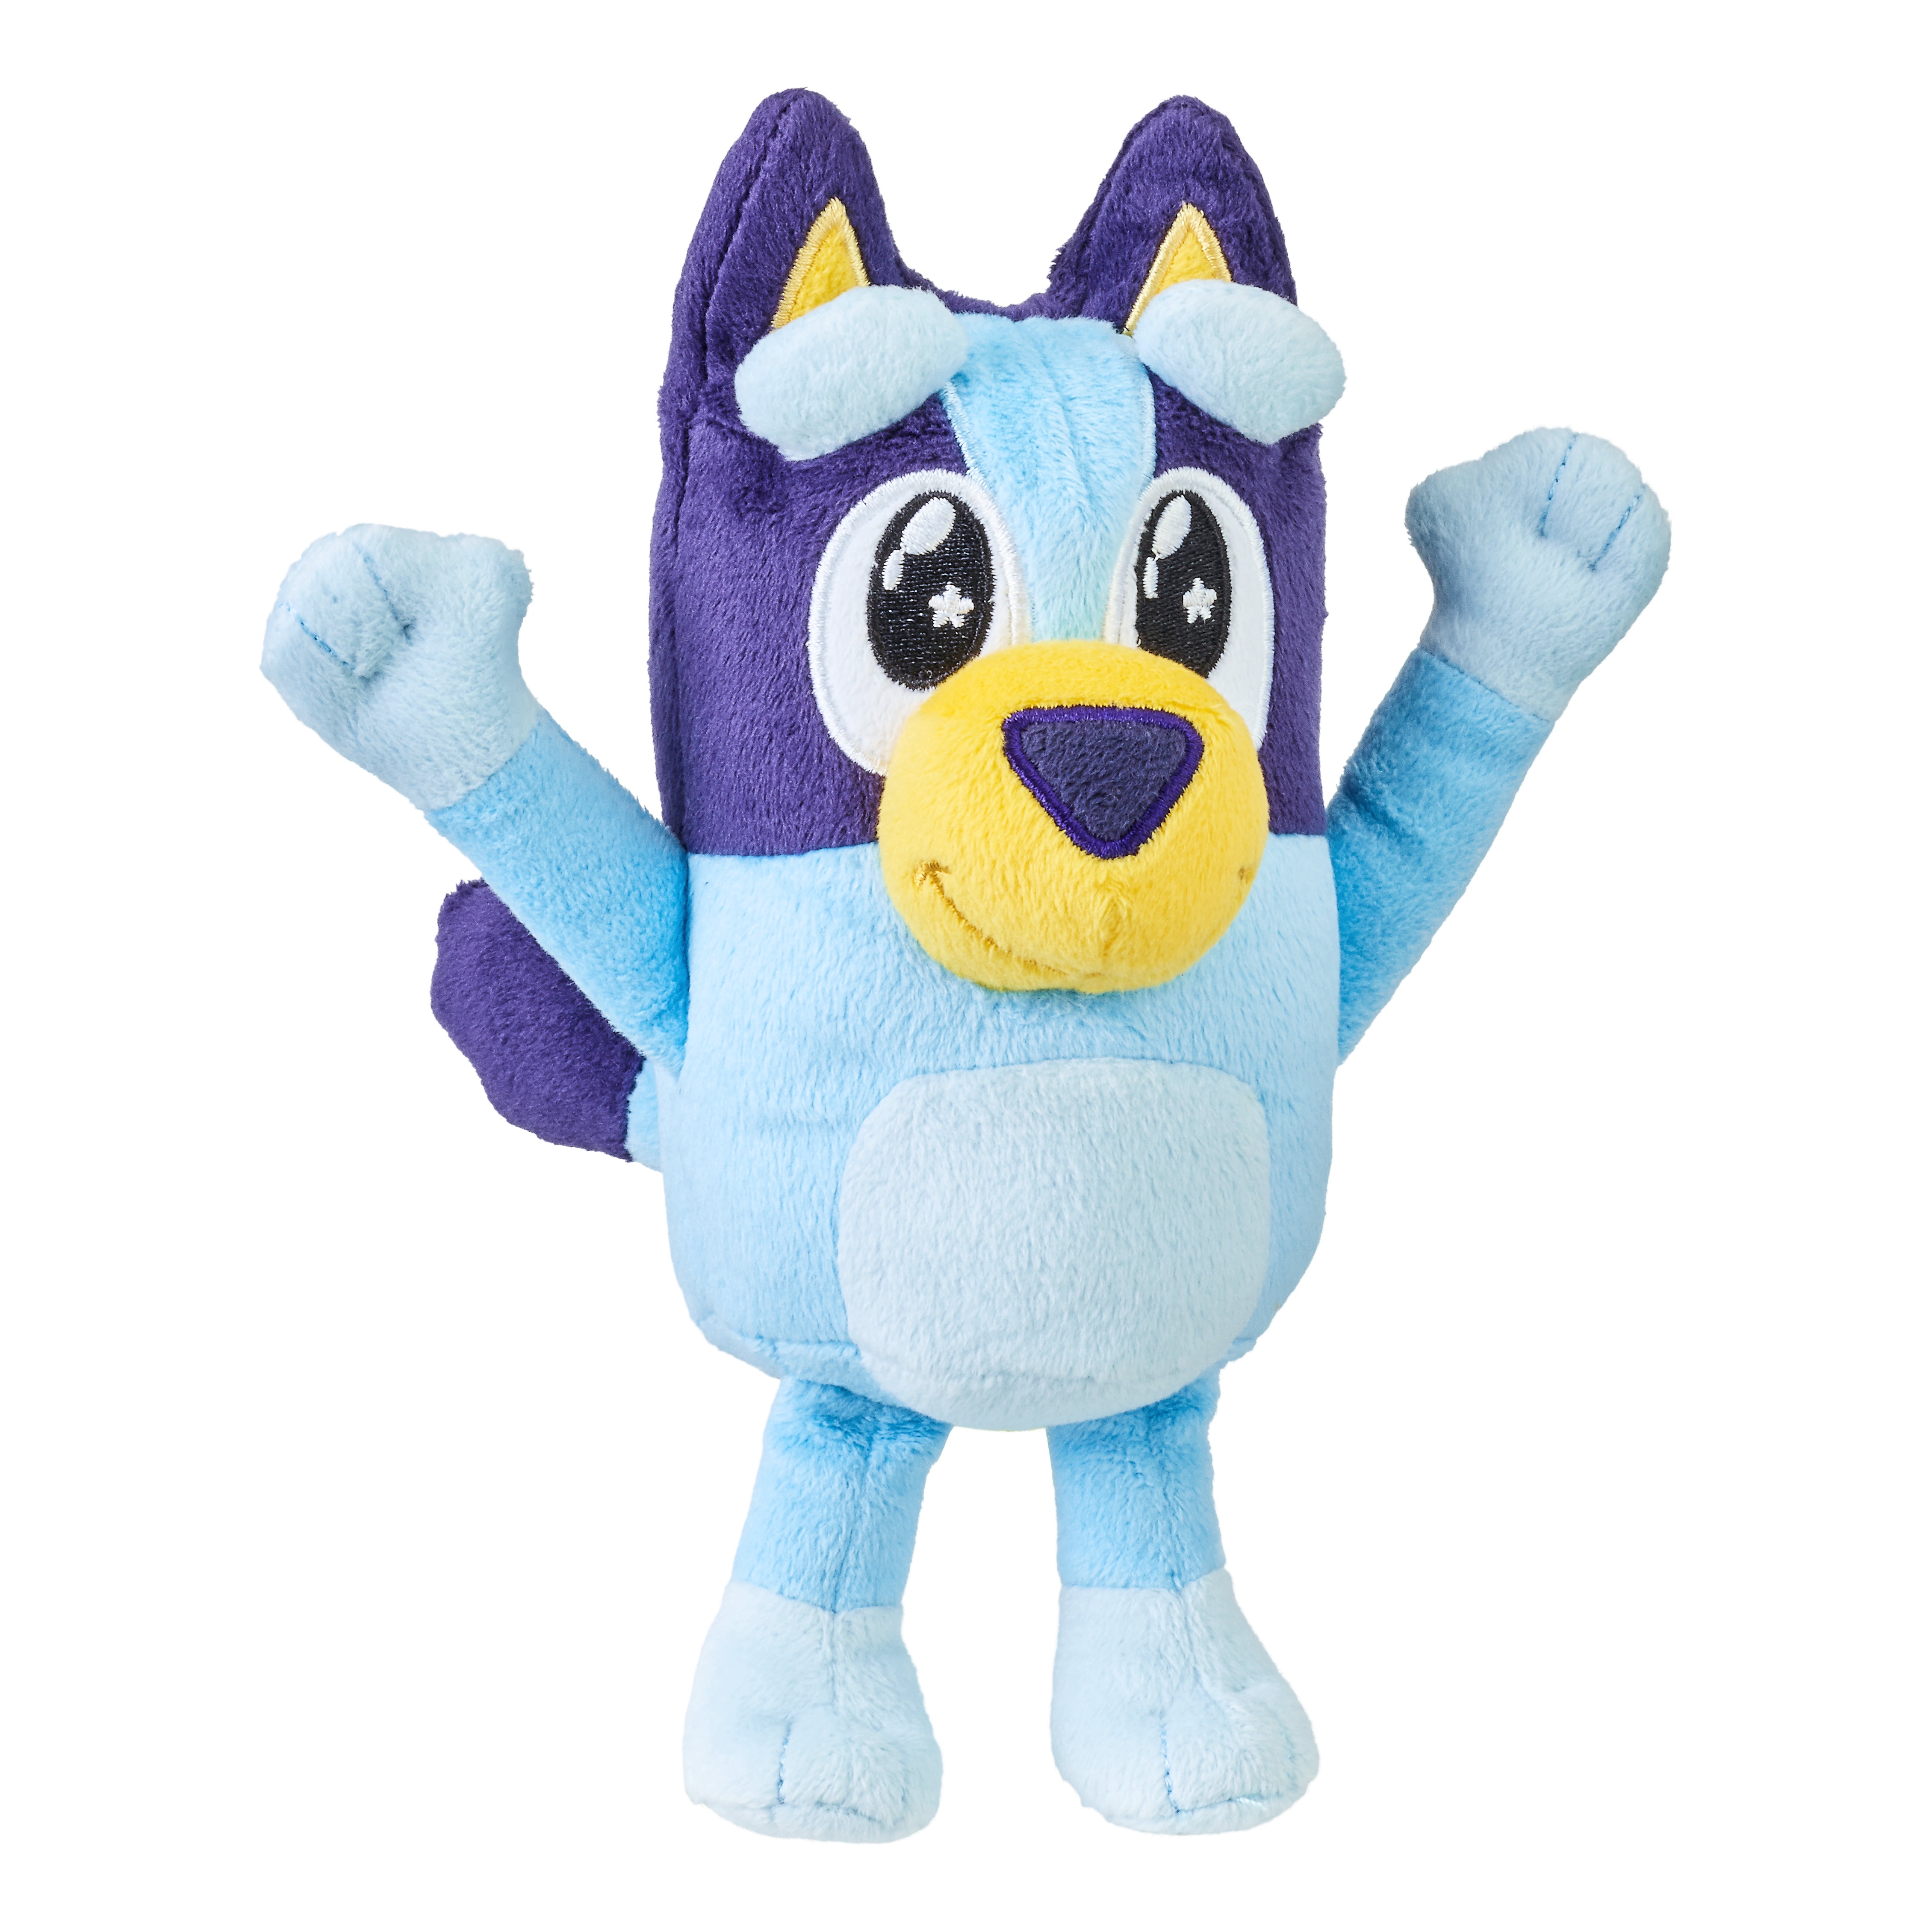 Bluey Friends 8'' SNICKERS Small Plush Bluey TV Show Plushie Toy